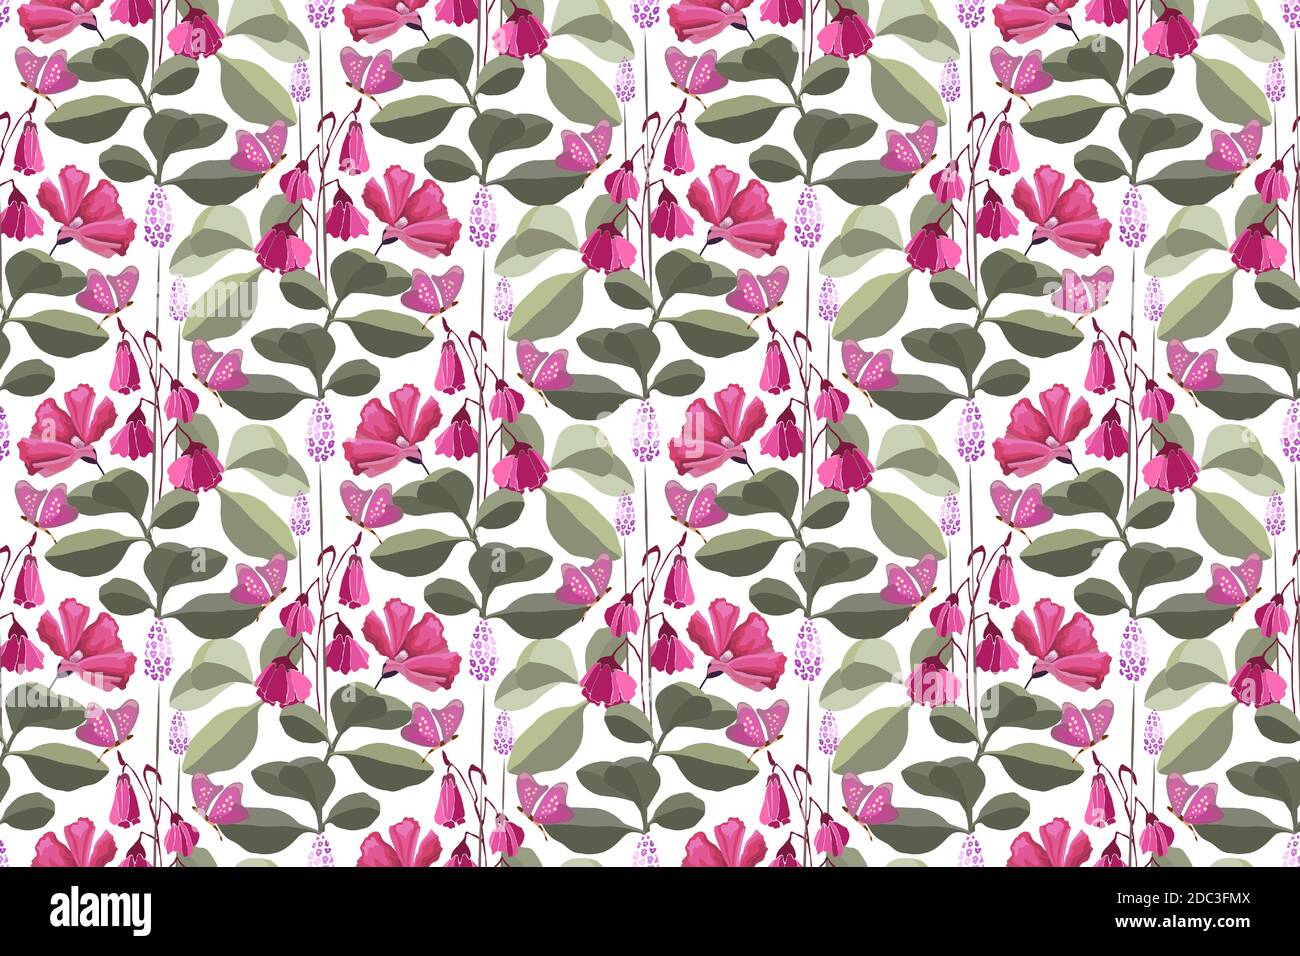 Vector floral seamless pattern with pink butterflies, pink and purple flowers. Stock Vector